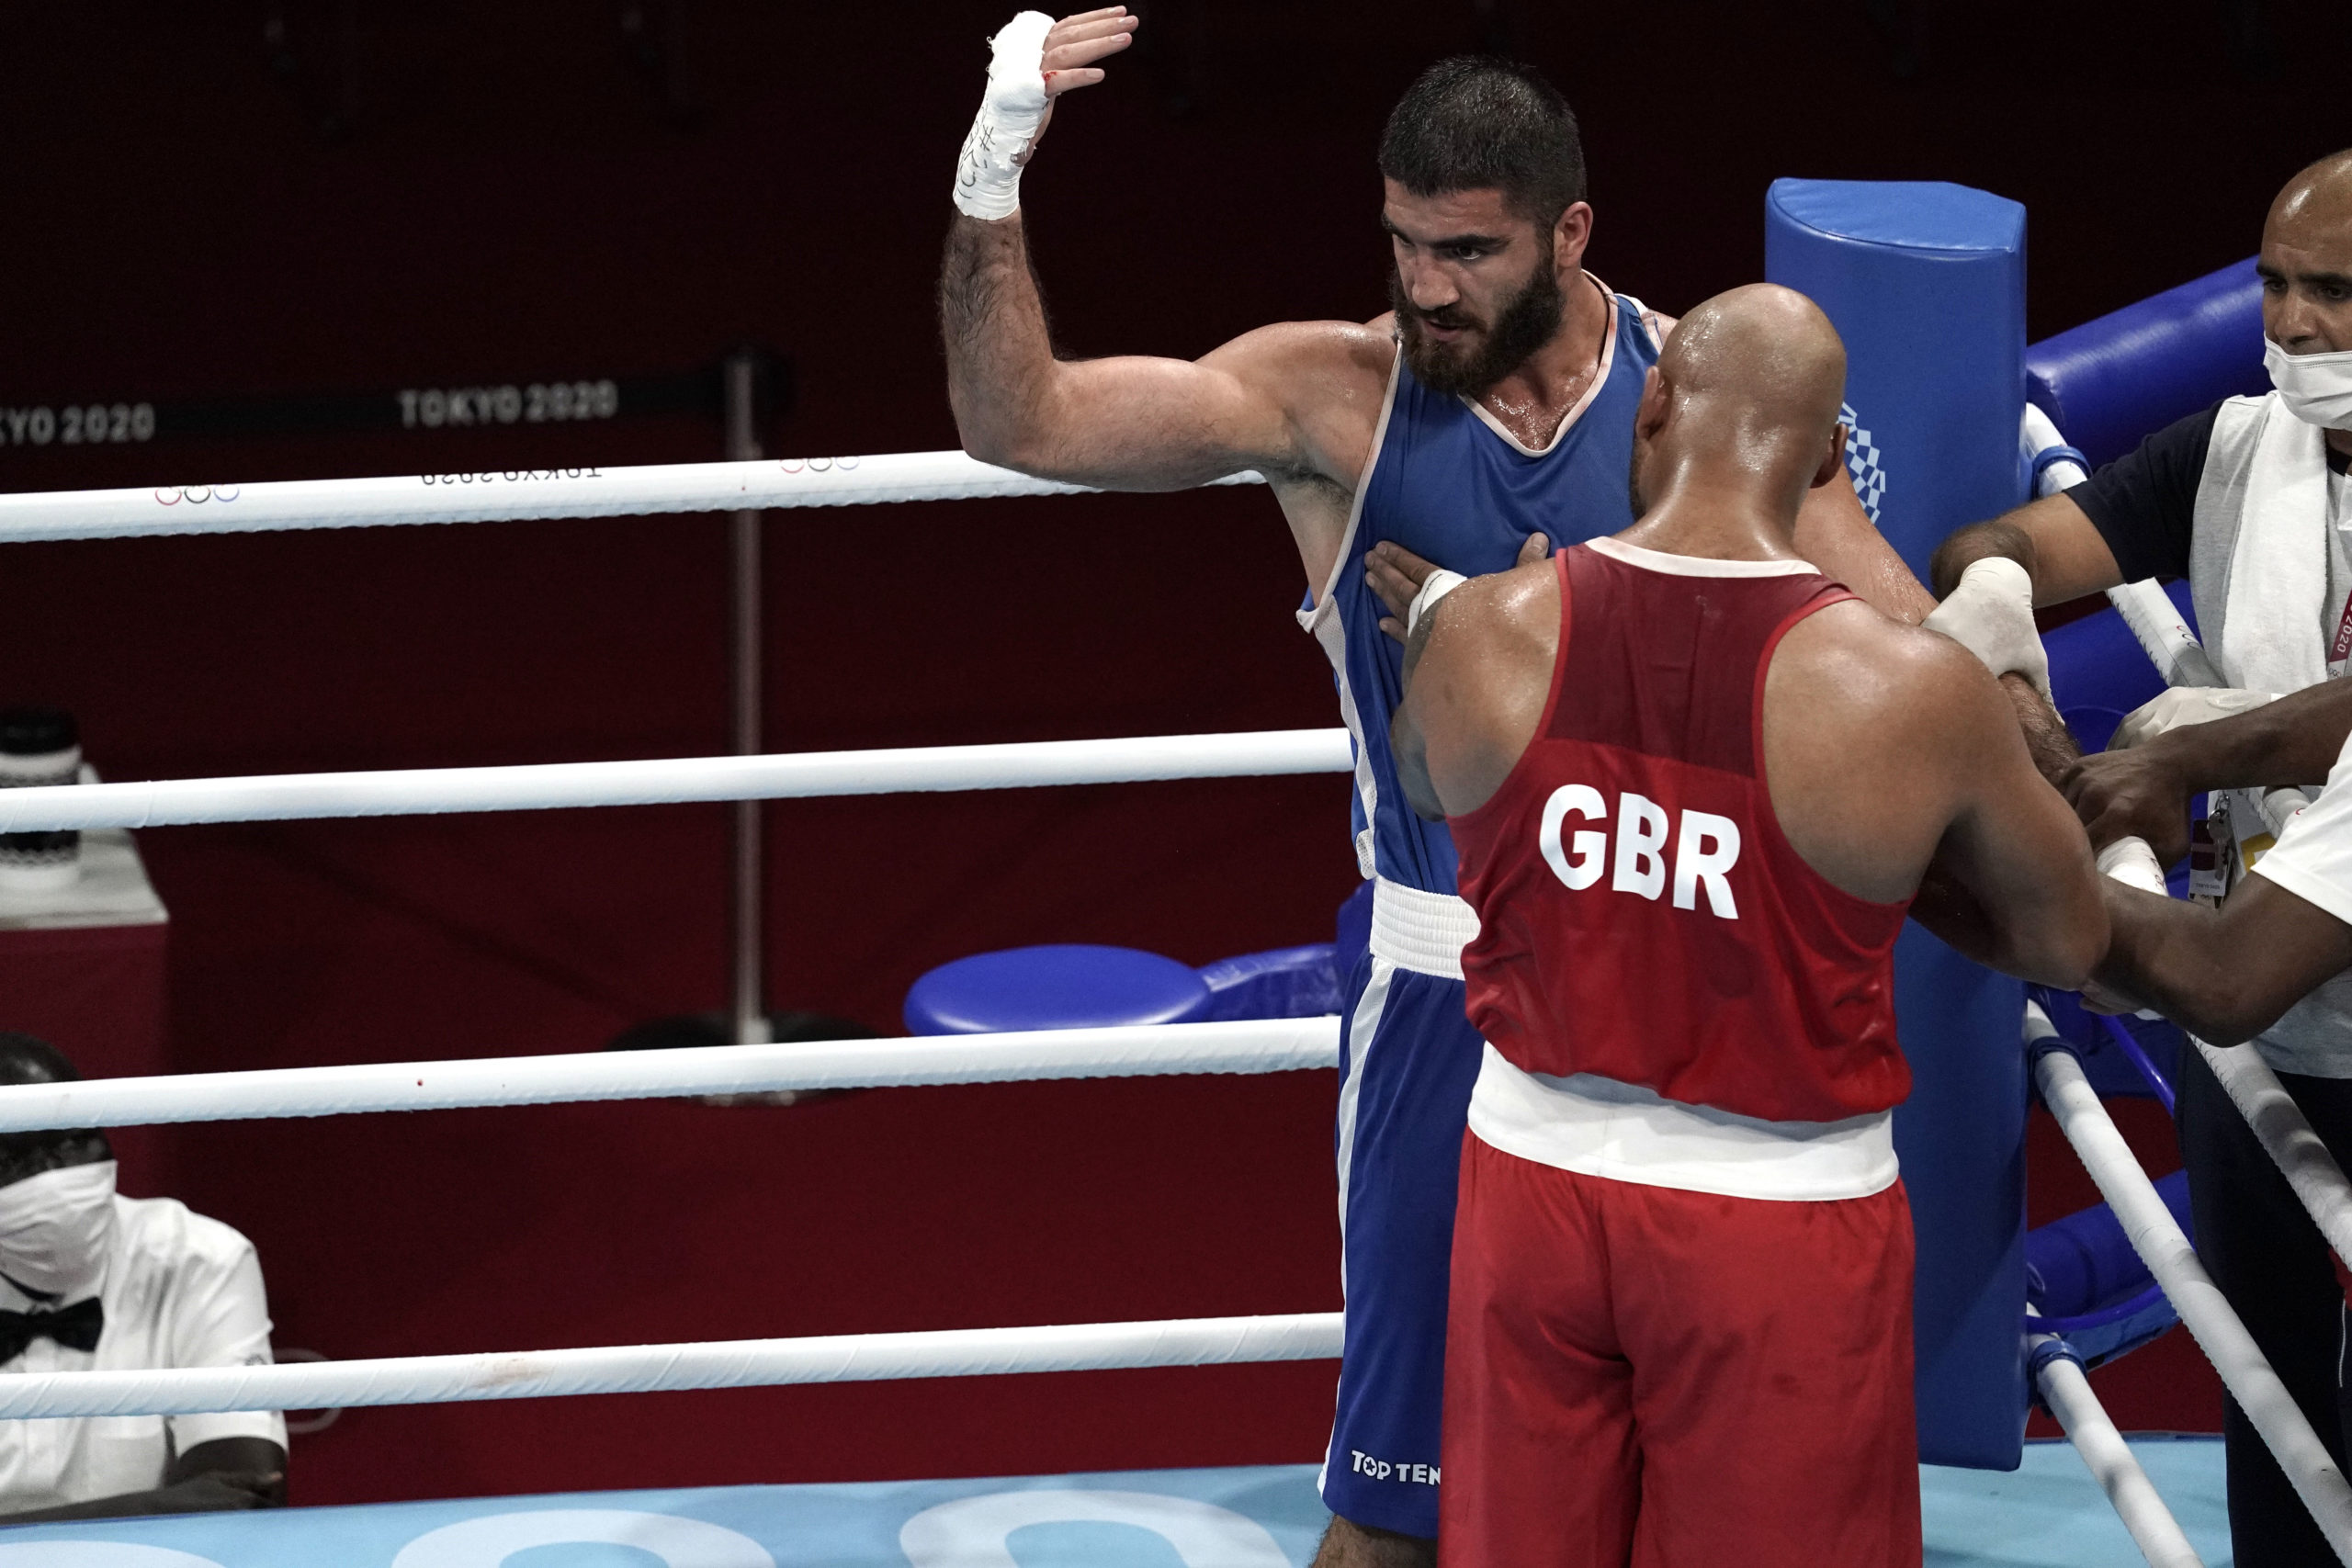 Mourad Aliev (FRA), blue shorts, yells at officials after being disqualified in his men's super heavy quarterfinal bout against Frazer Clarke (GBR), red shorts, during the Tokyo 2020 Olympic Summer Games at Kokugikan Arena